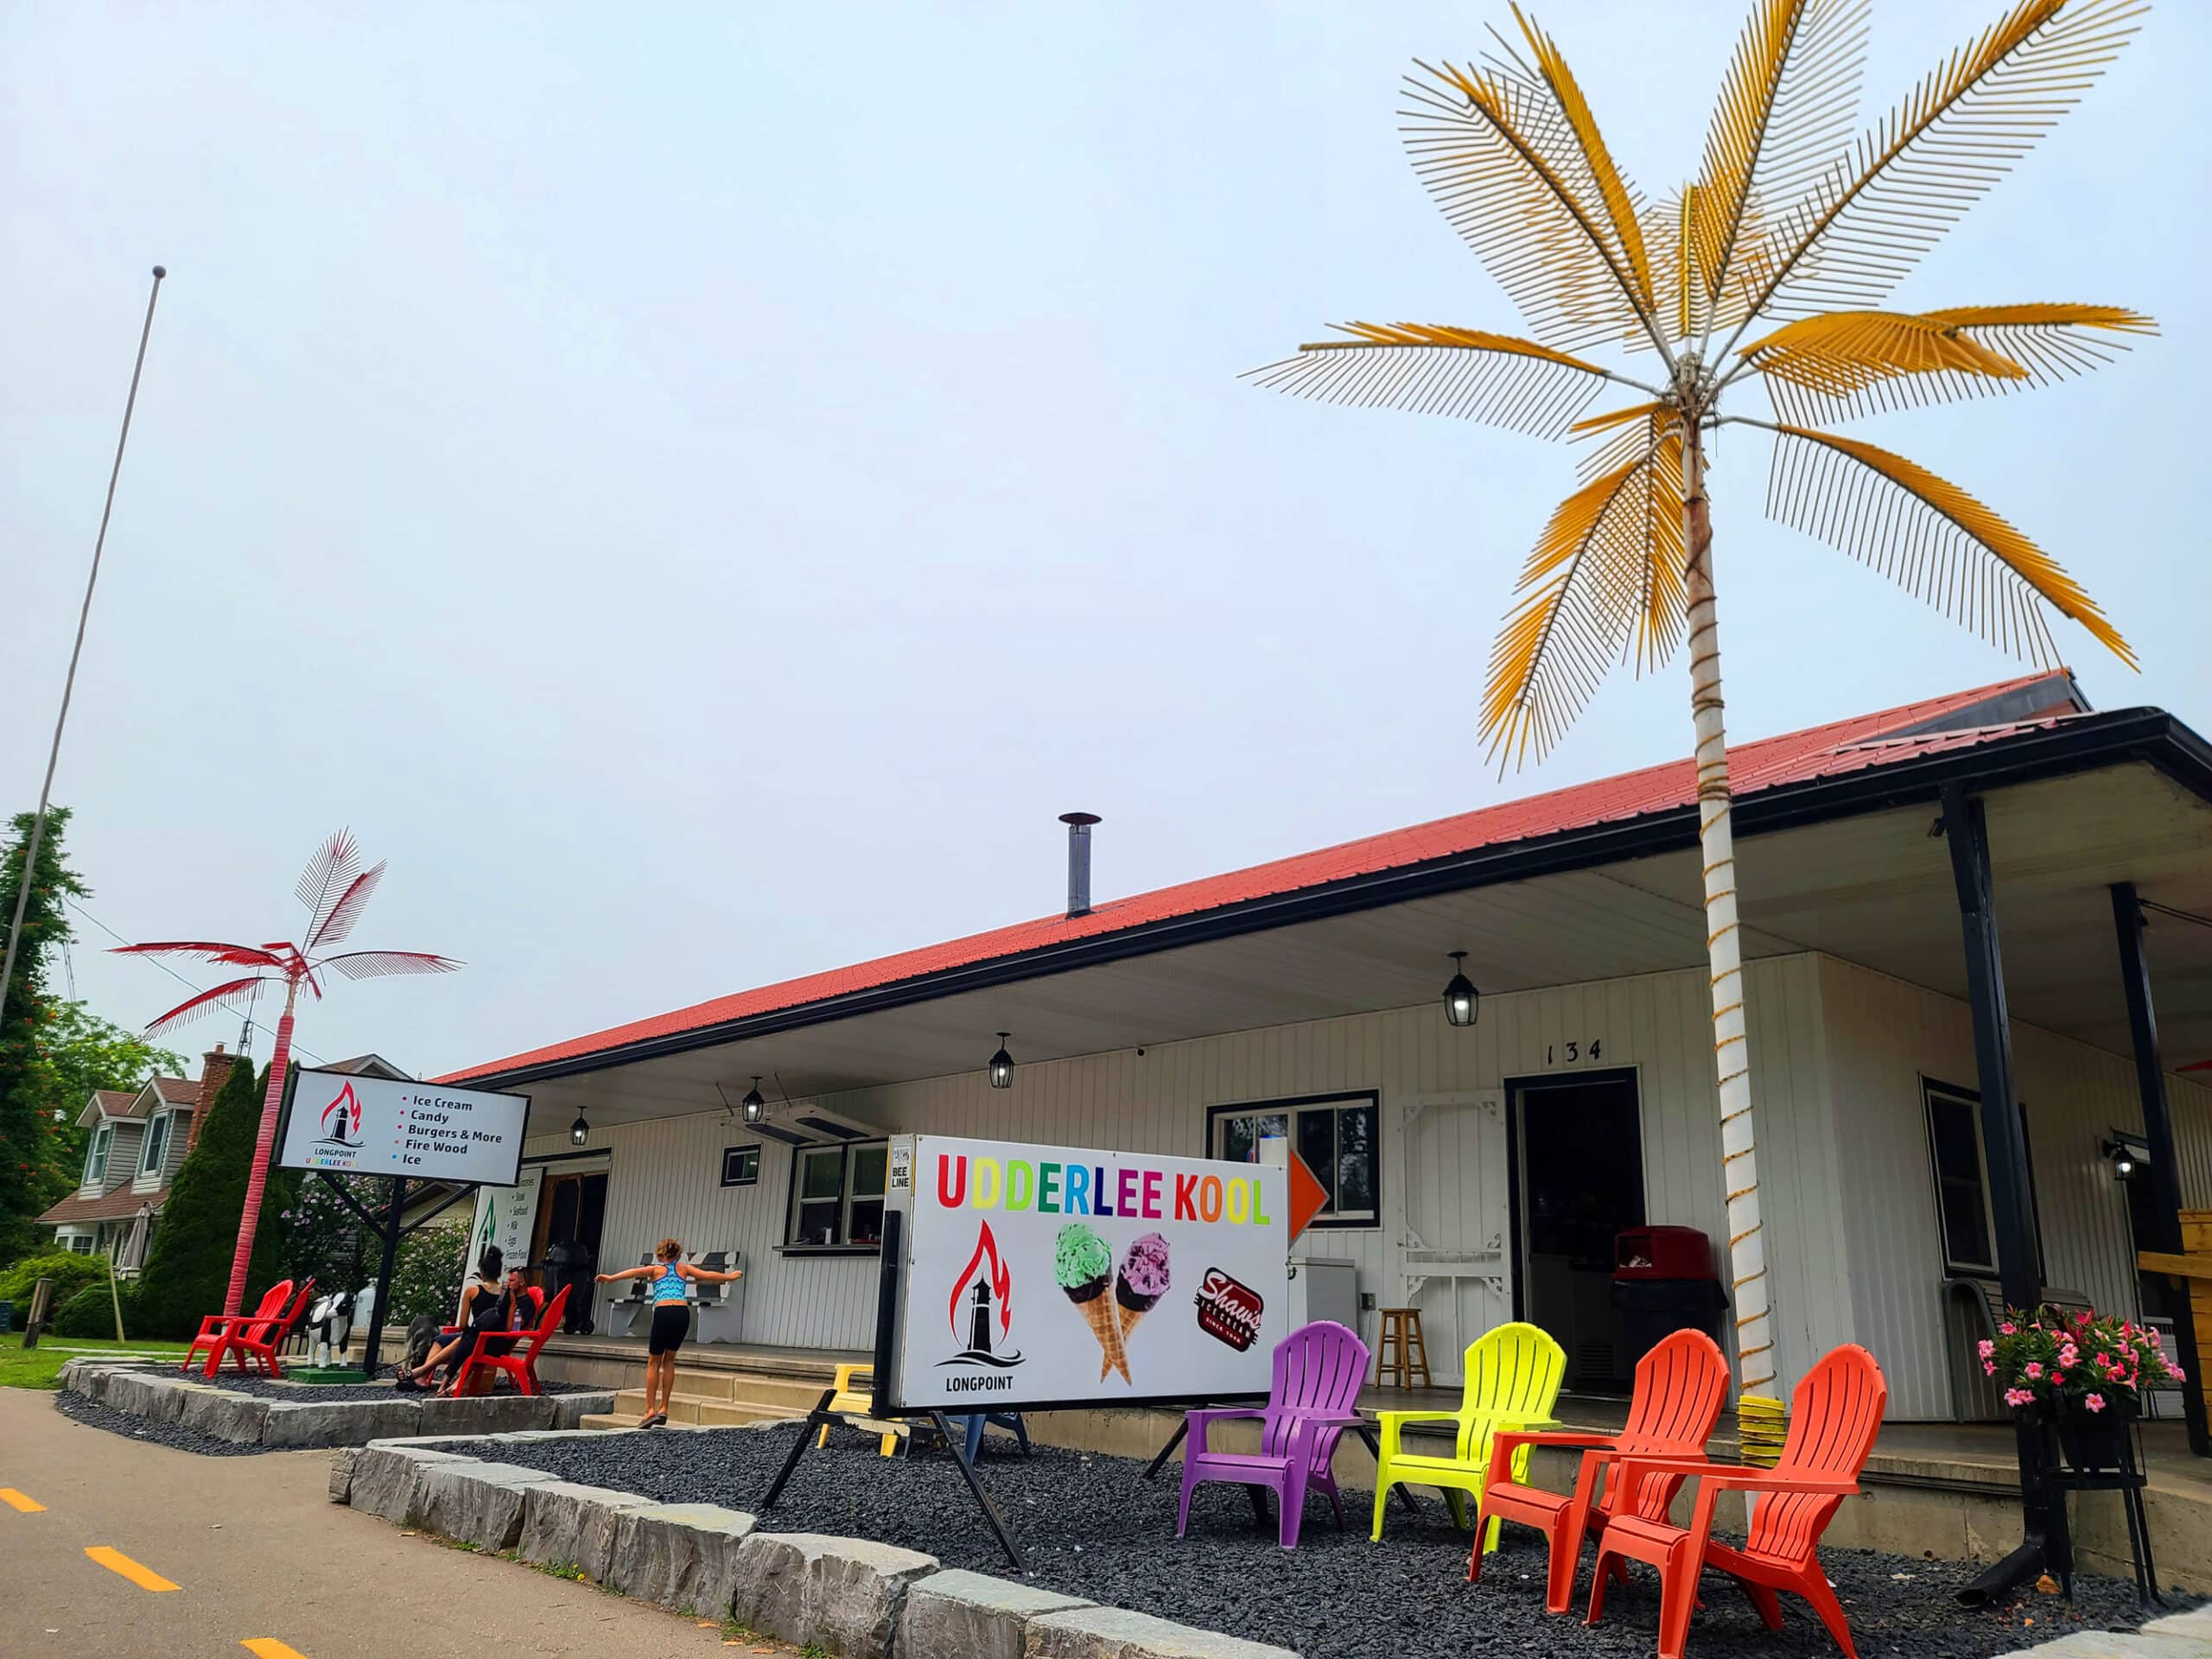 The underlee kool restaurant in long point.  There are 2 big metal palm trees in front.